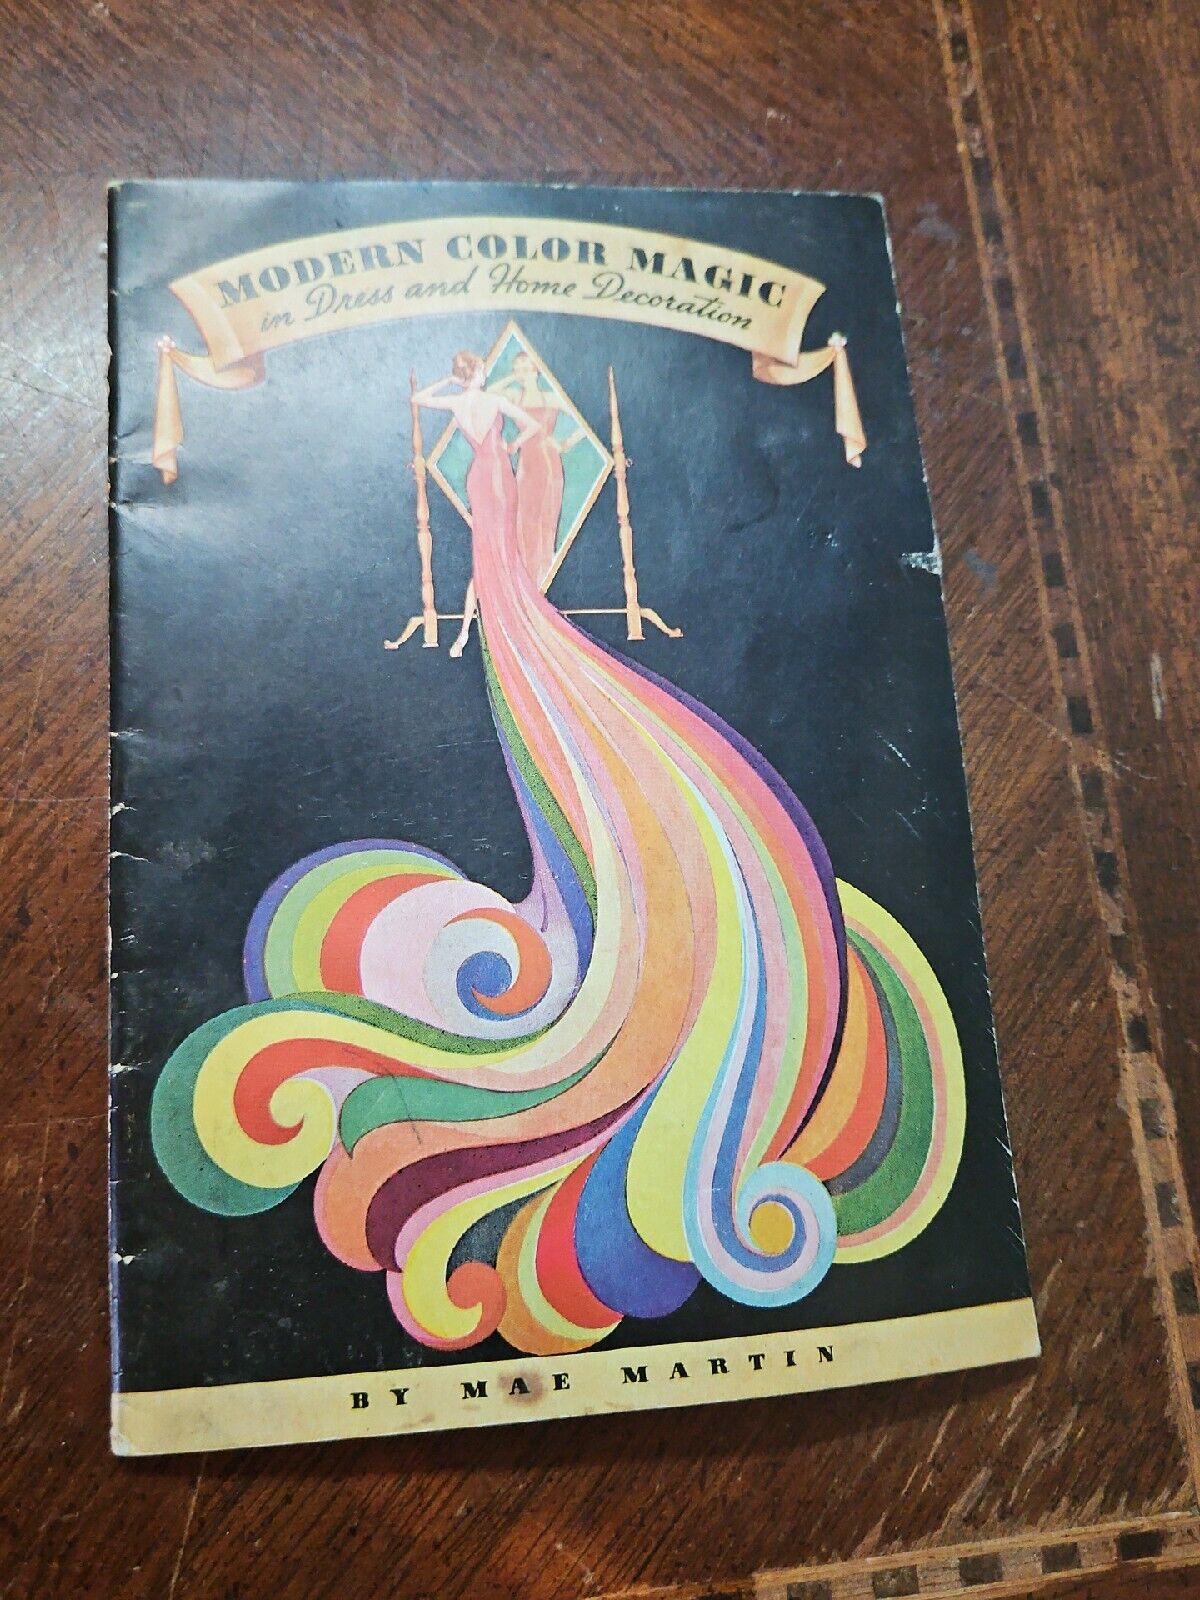 Vintage Booklet 1937 Modern Color Magic In Dress And Home Decoration Mae Martin